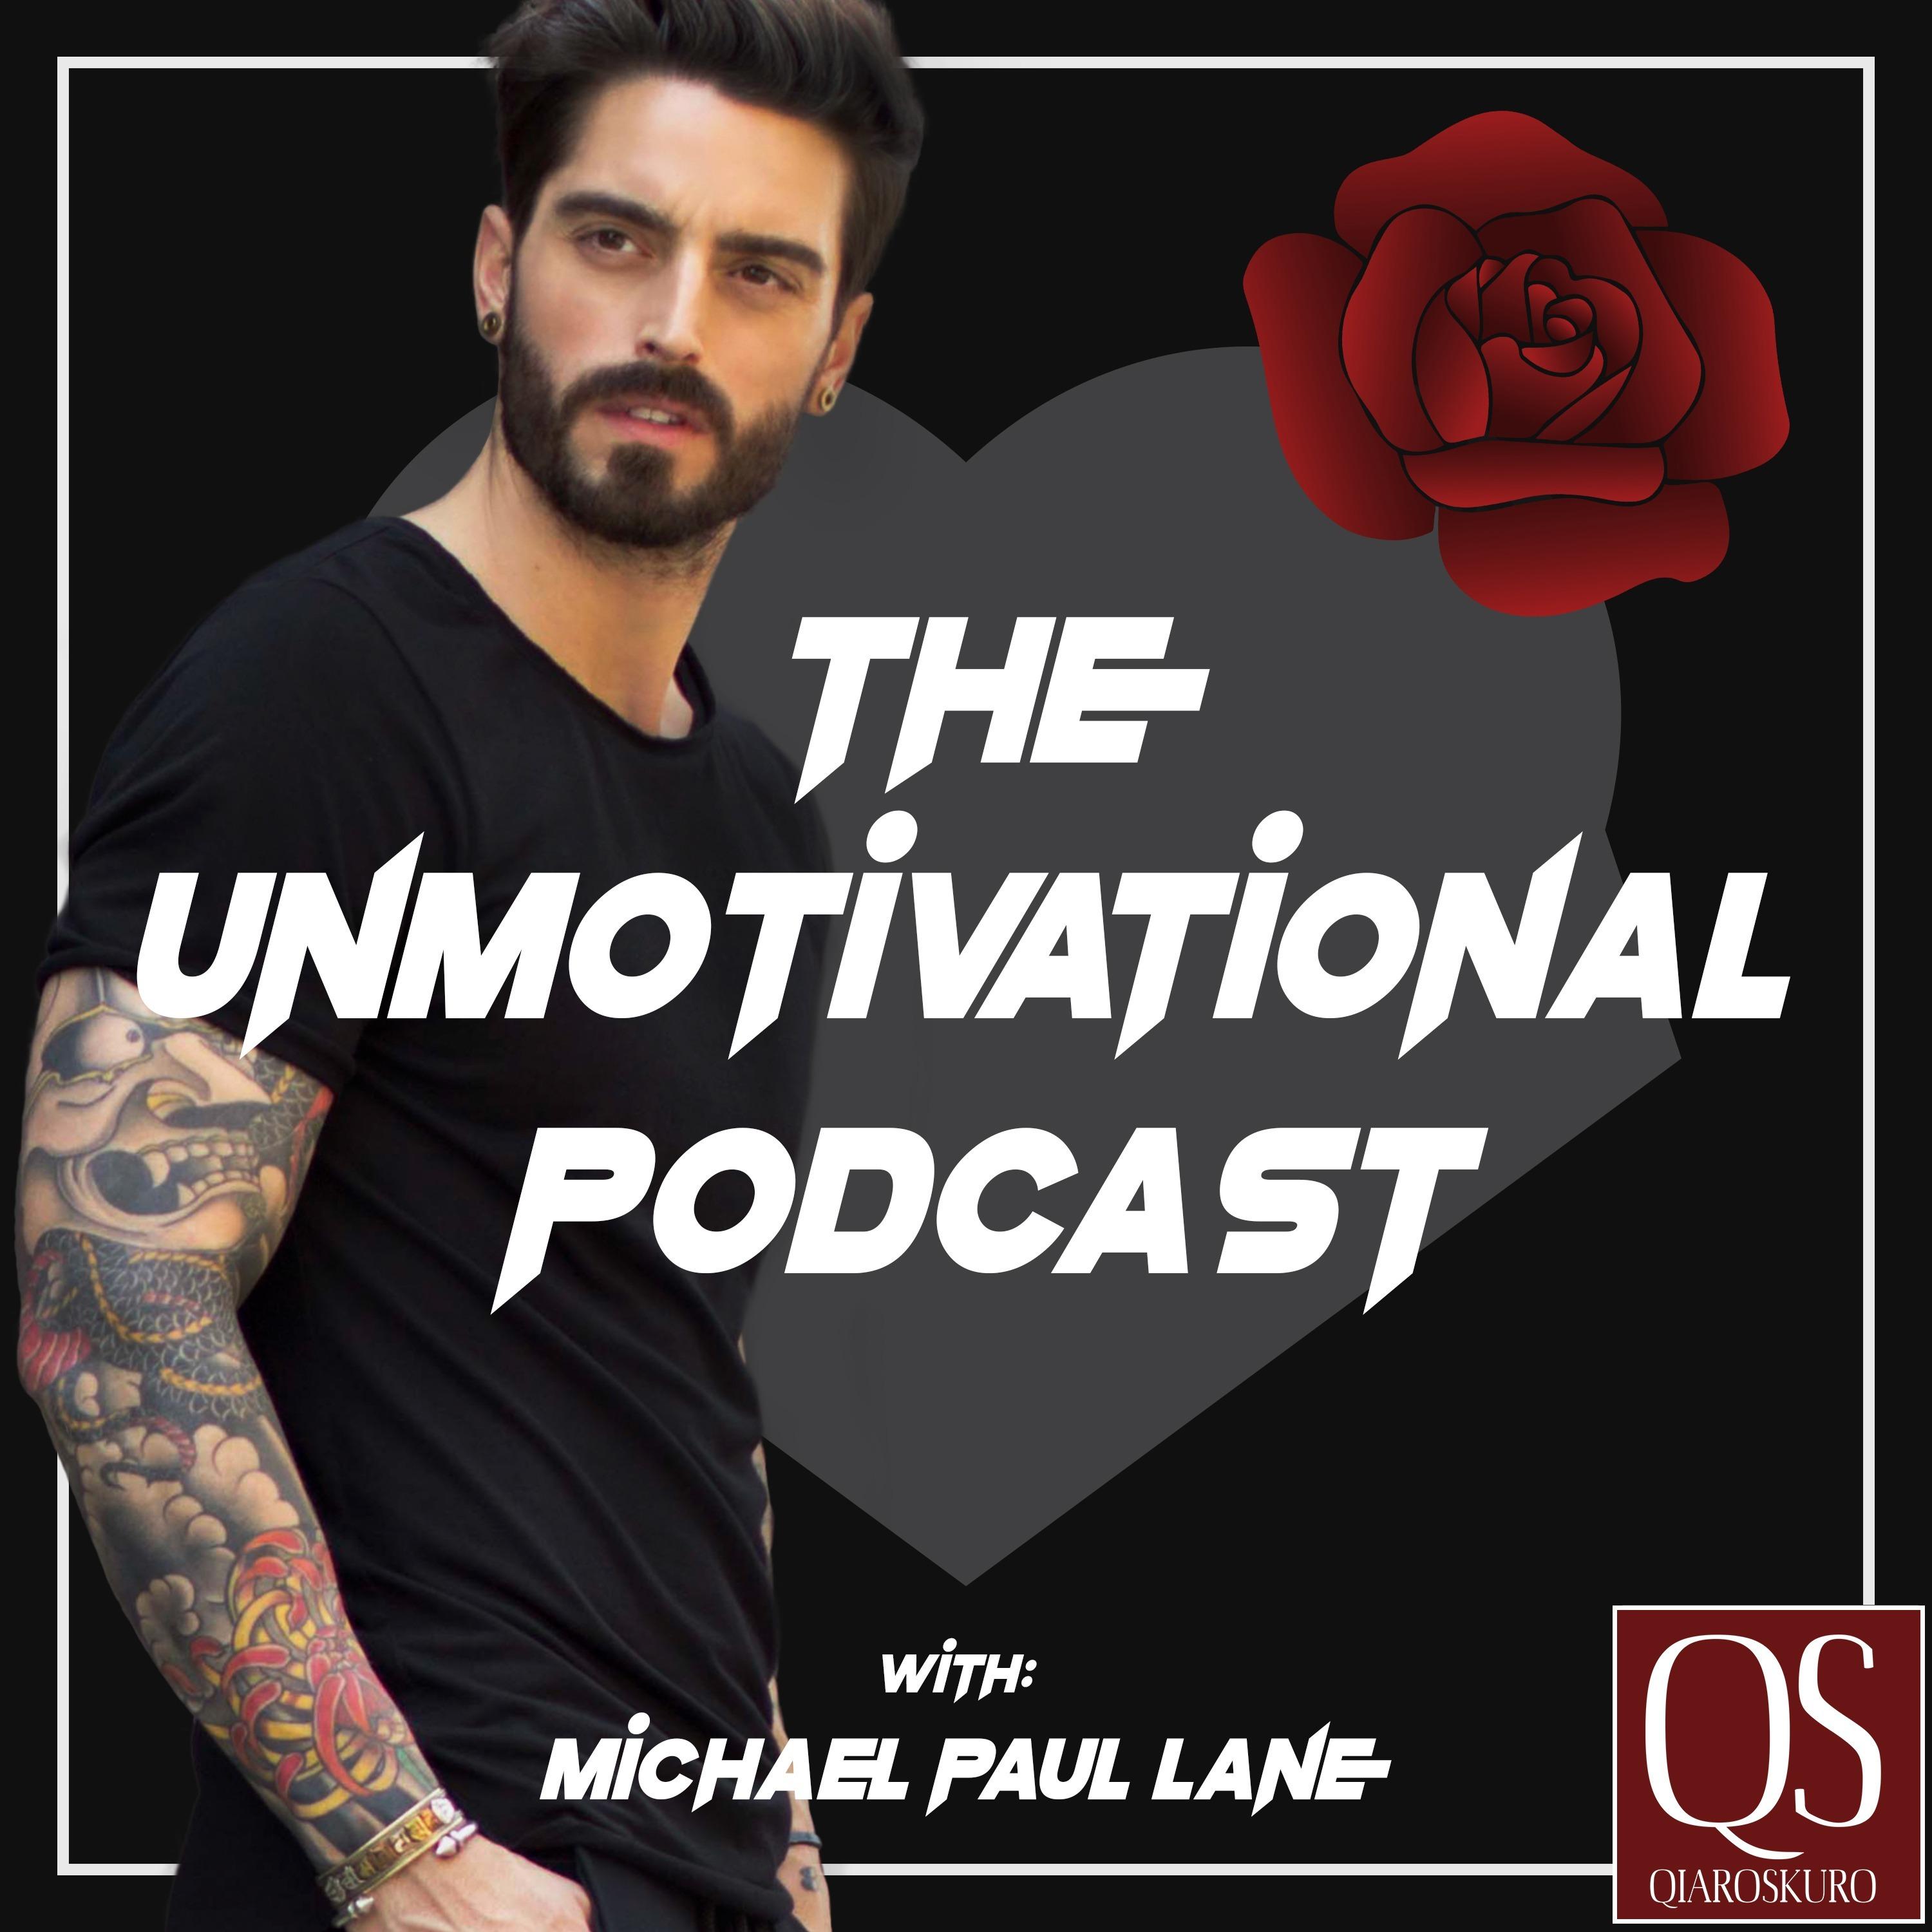 The Unmotivational Podcast